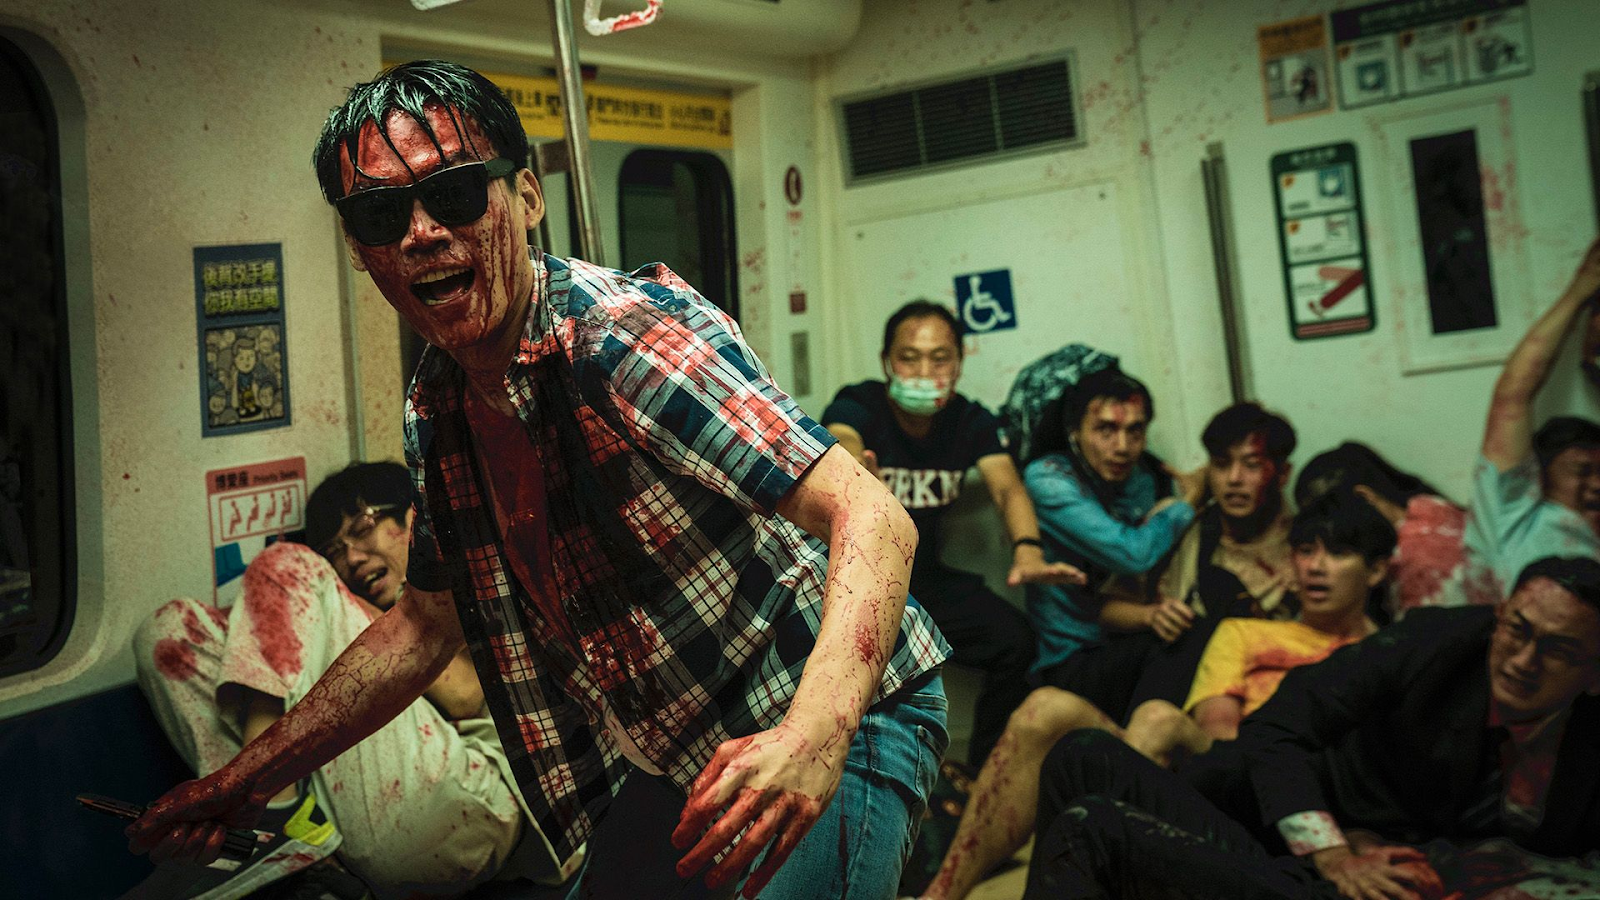 A man drenched in blood wearing sunglasses and a plaid shirt. People are huddled in terror behind him, appearing to be on public transportation.